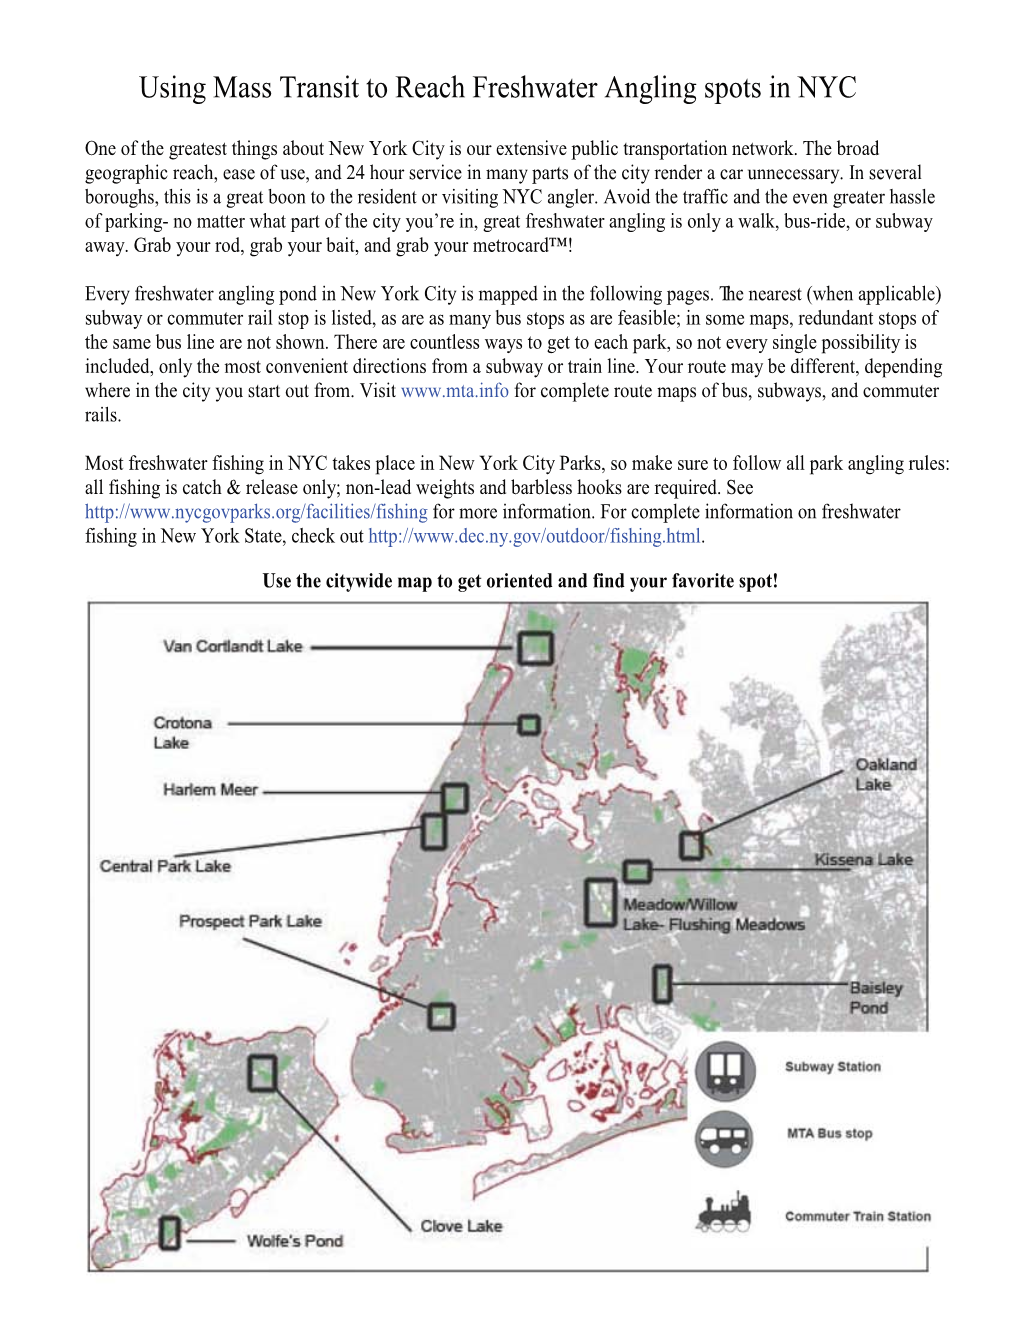 Using Mass Transit to Reach Freshwater Angling Spots in NYC